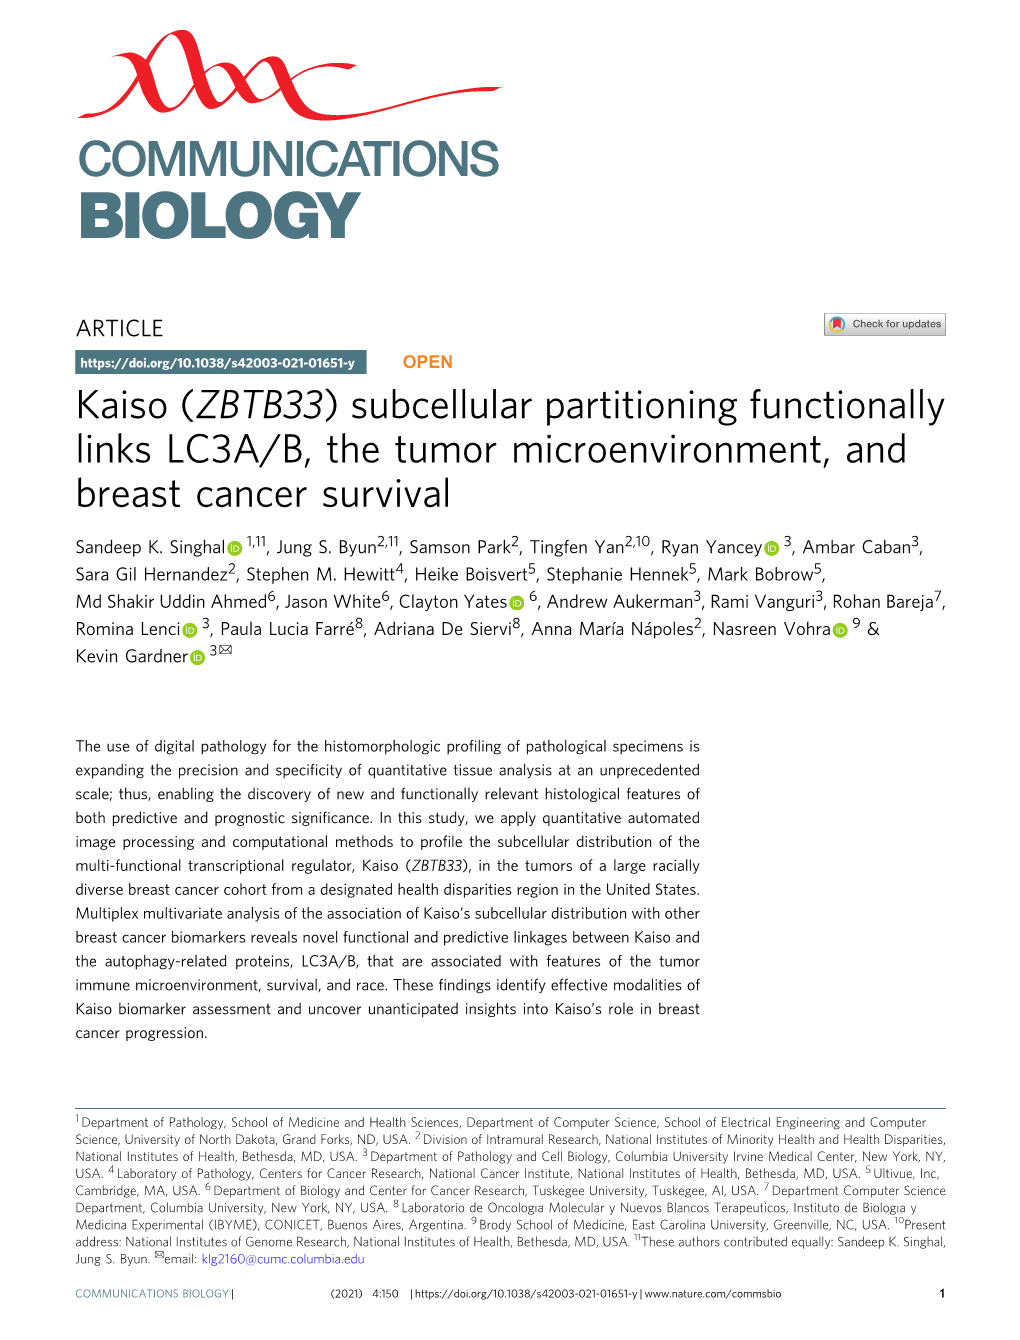 Kaiso (ZBTB33) Subcellular Partitioning Functionally Links LC3A/B, the Tumor Microenvironment, and Breast Cancer Survival